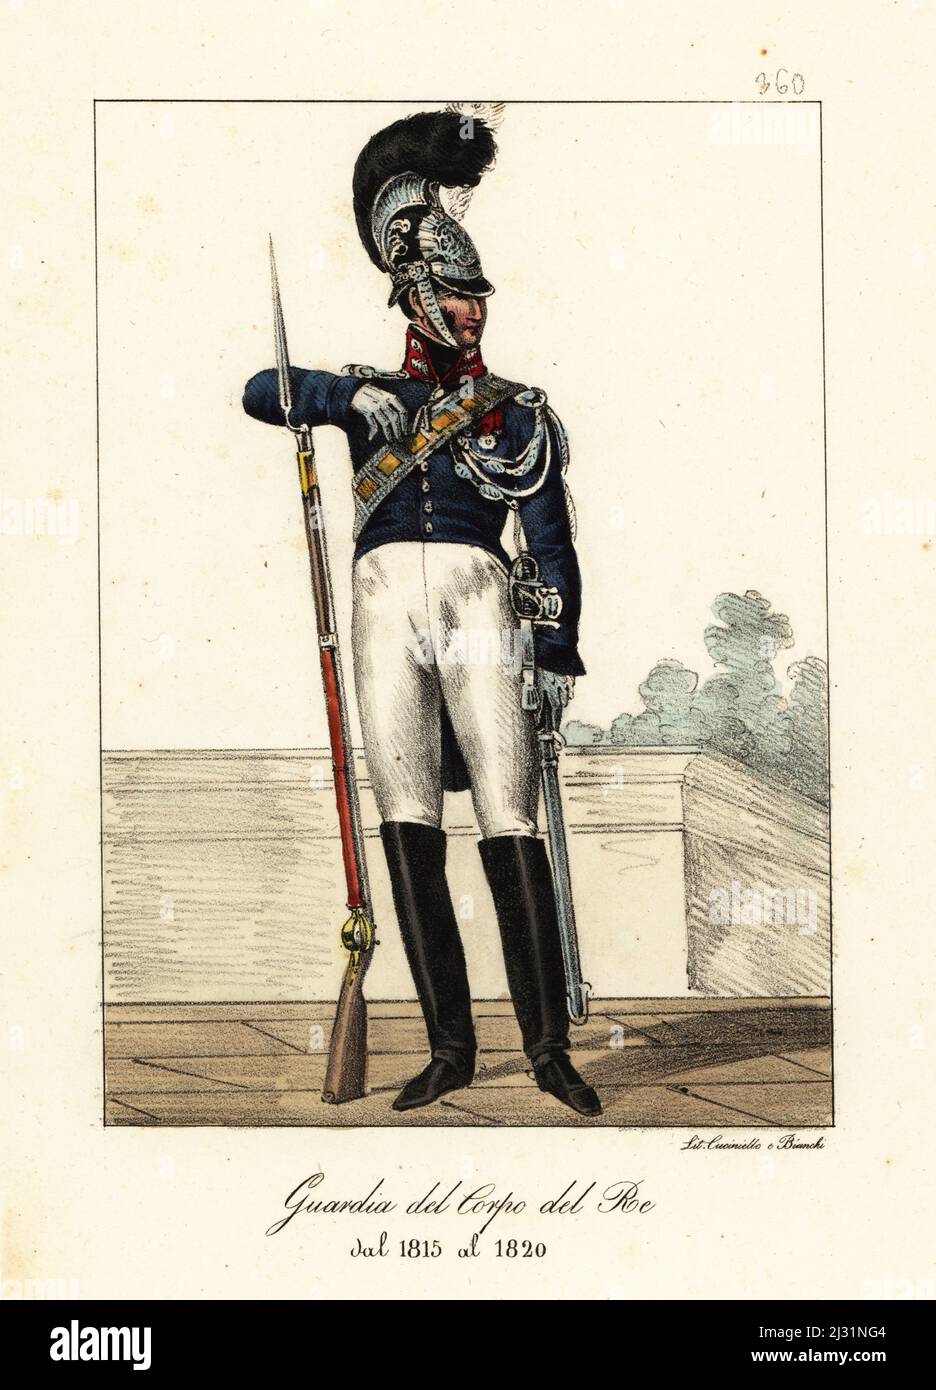 Uniform of the French Life Guards, Bourbon Restoration, 1815-1820. In  dragoon's helmet with brush, blue coat with red collar, breeches, boots,  armed with musket and sword. Garde du Corps du Roi de